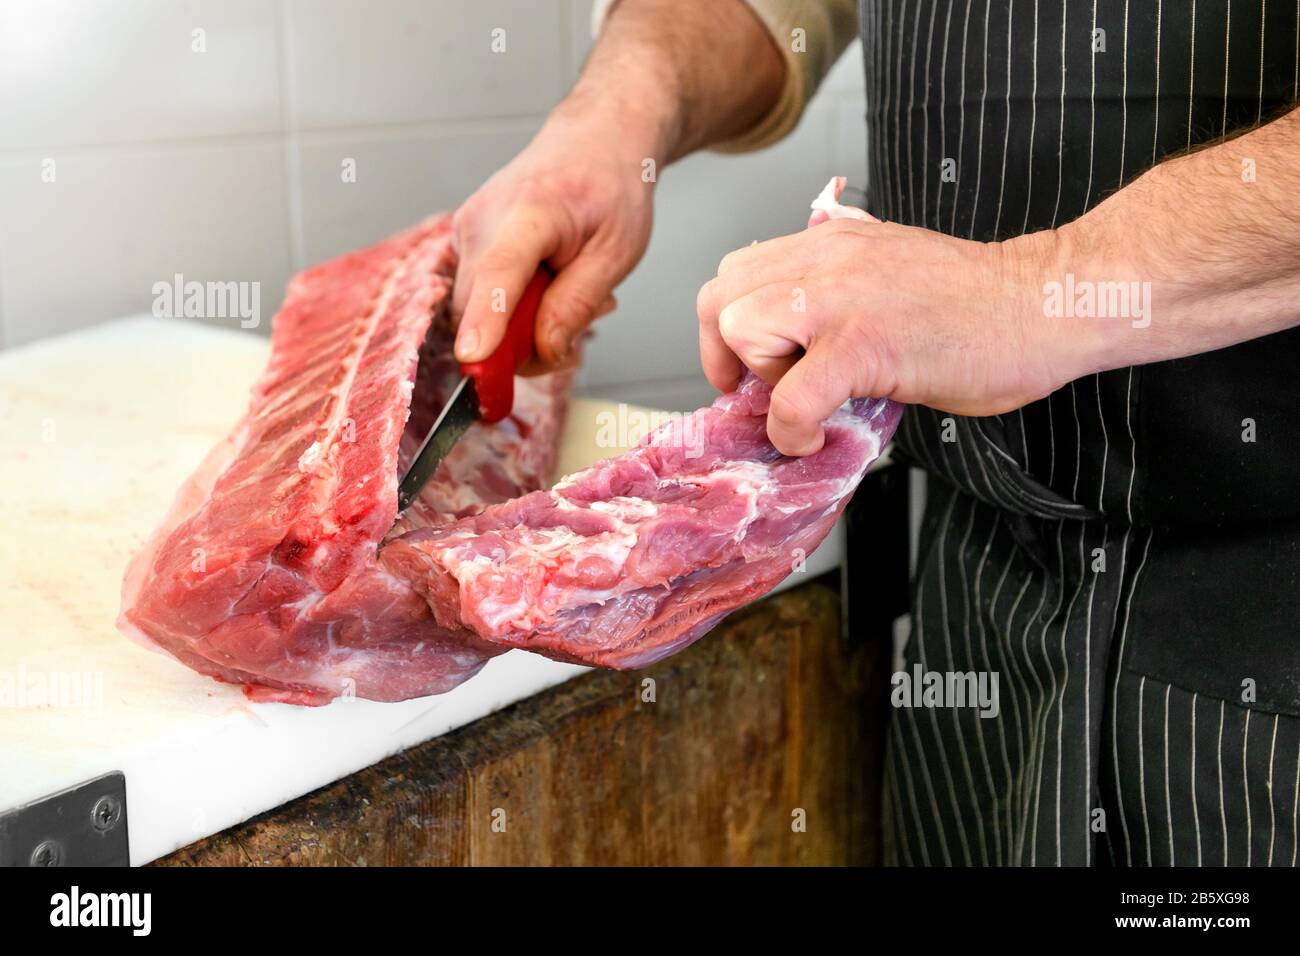 Butcher slicing a raw pork fillet off the bone with a sharp knife on a butchers block in a close up on his hands Stock Photo